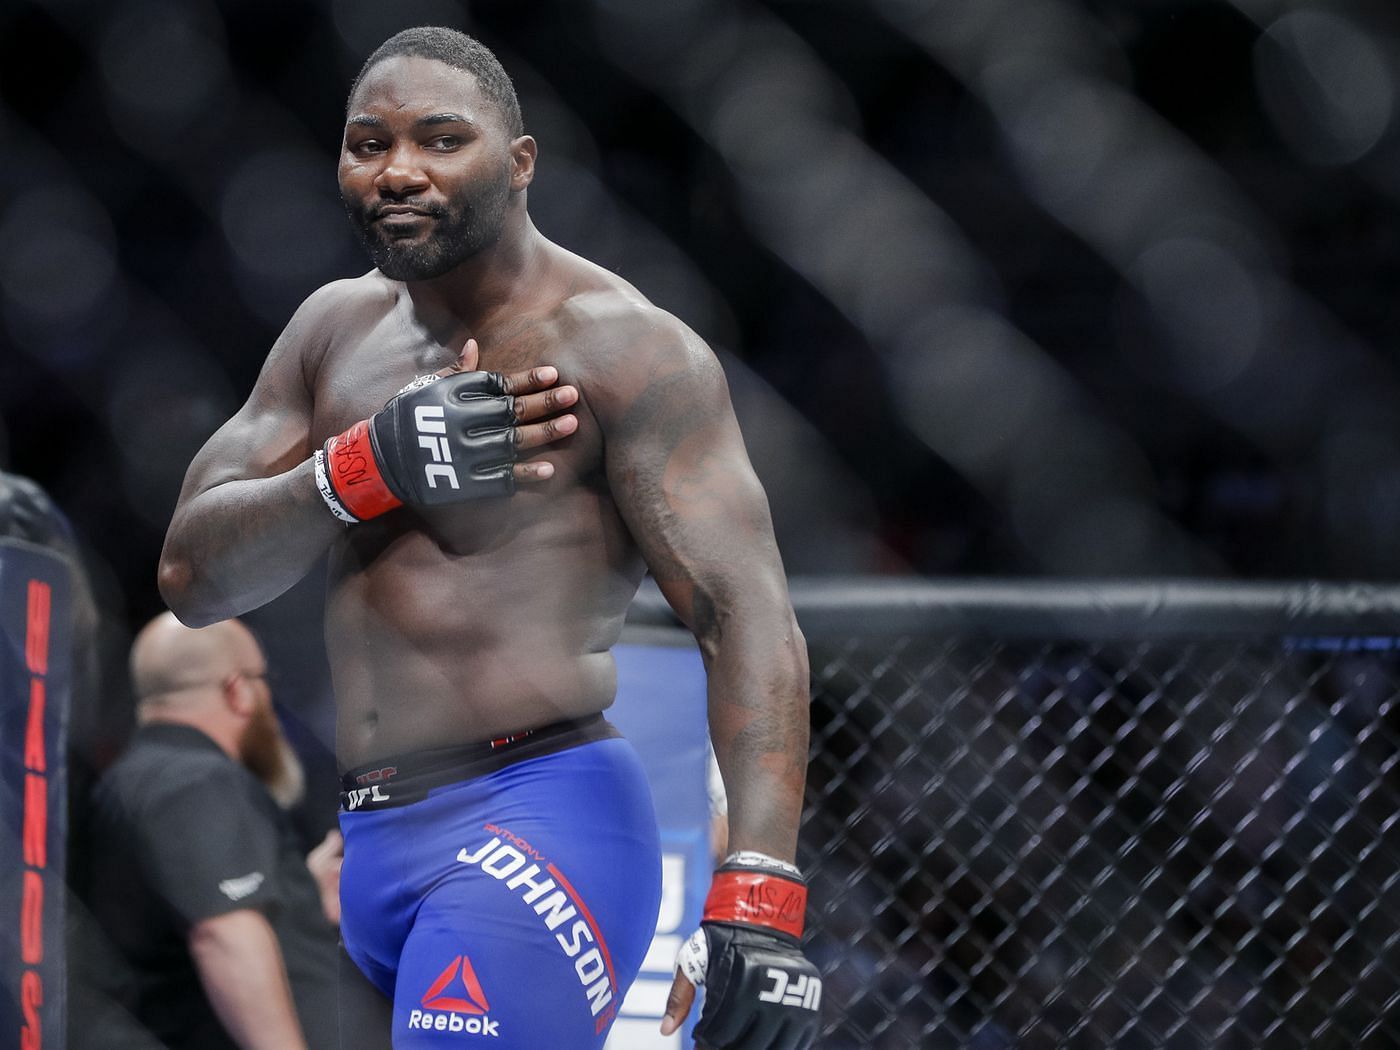 Anthony Johnson passed away at the age of 38 